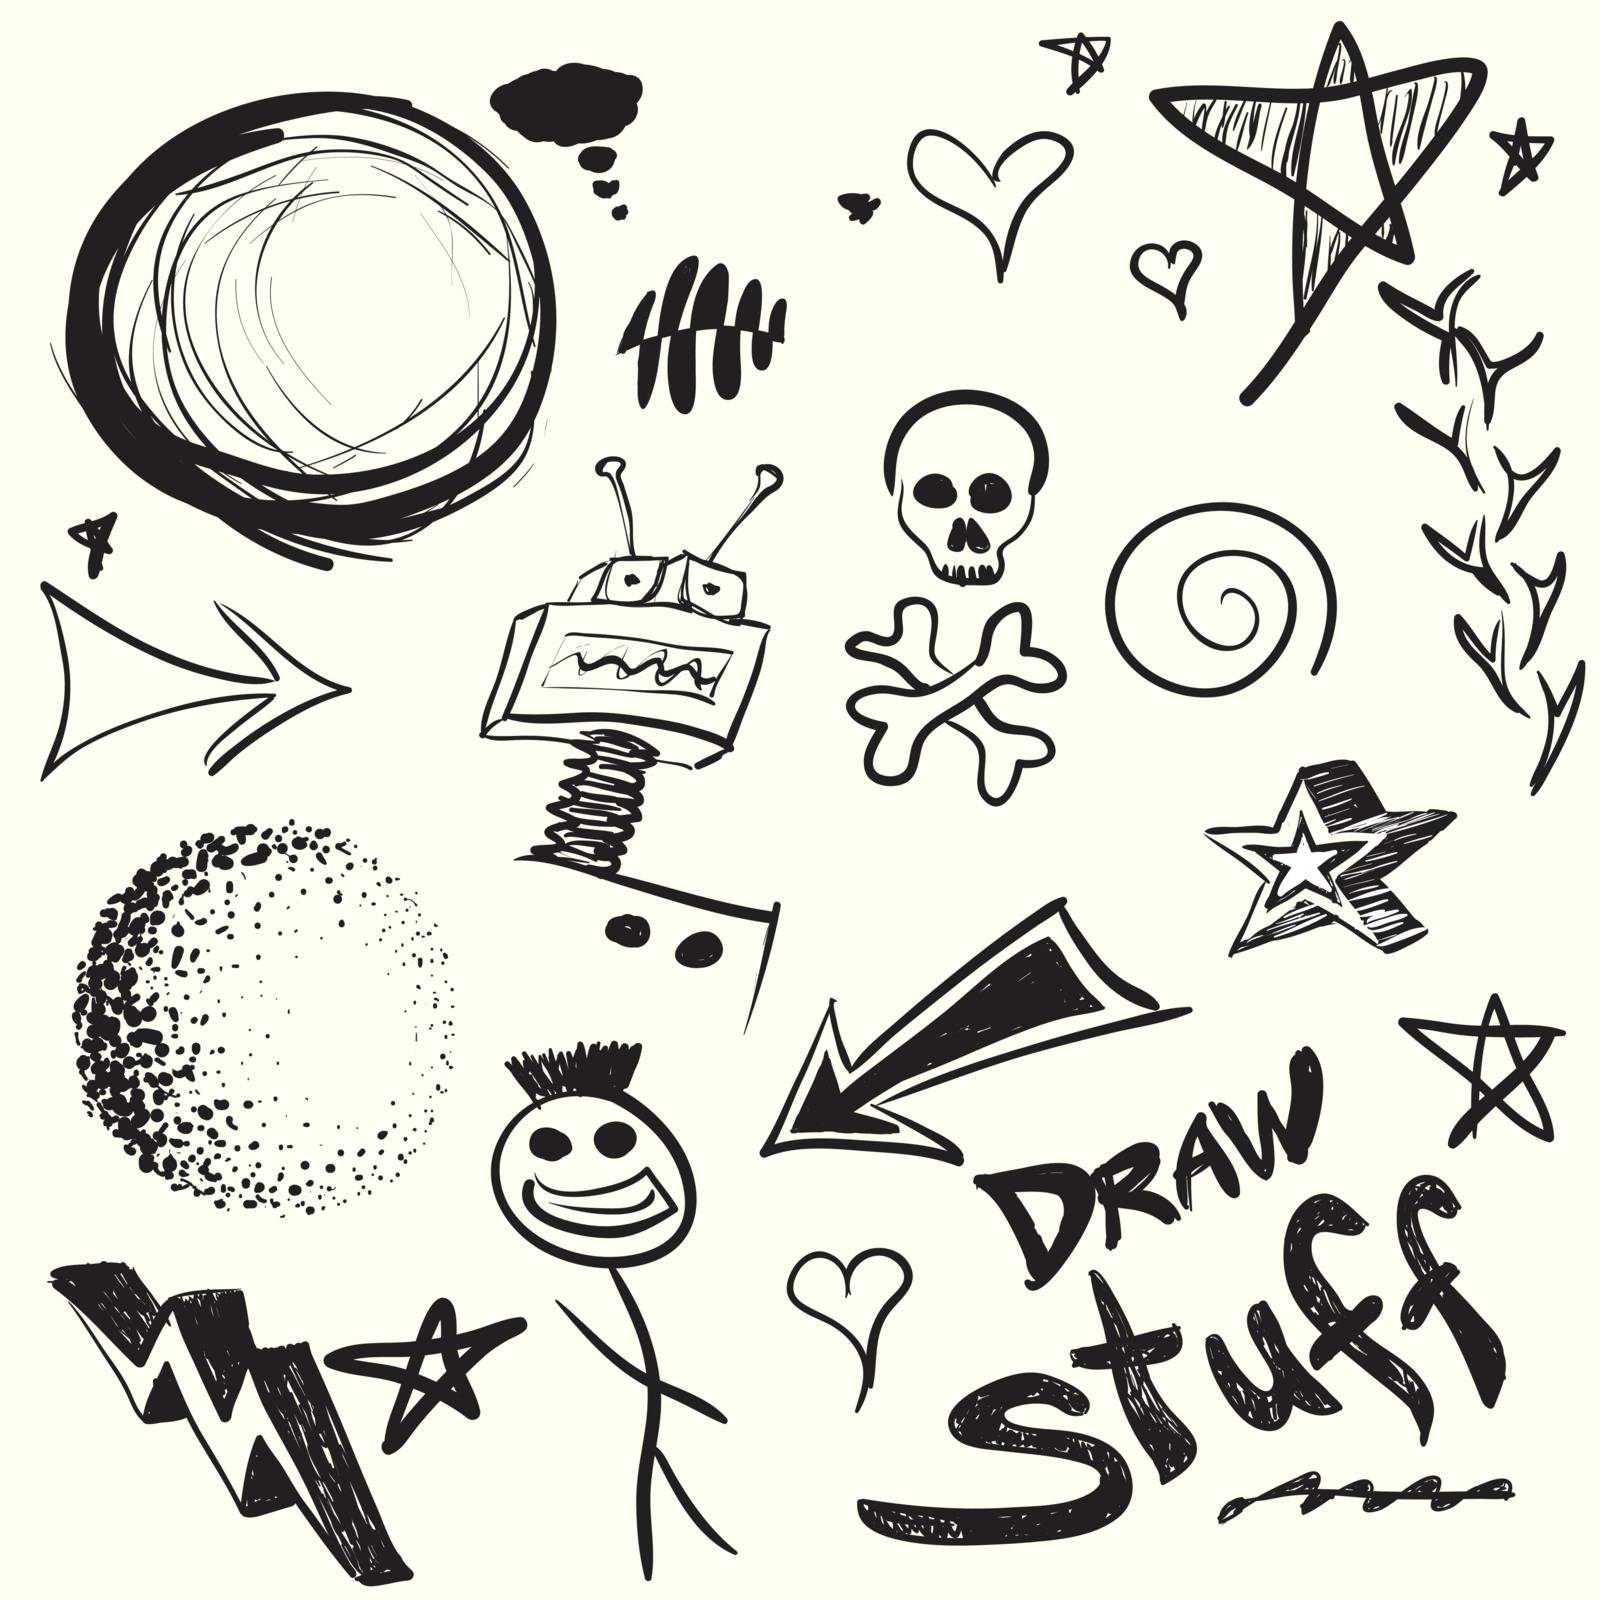 Collection of doodles and drawings in vector format with a variety of elements.